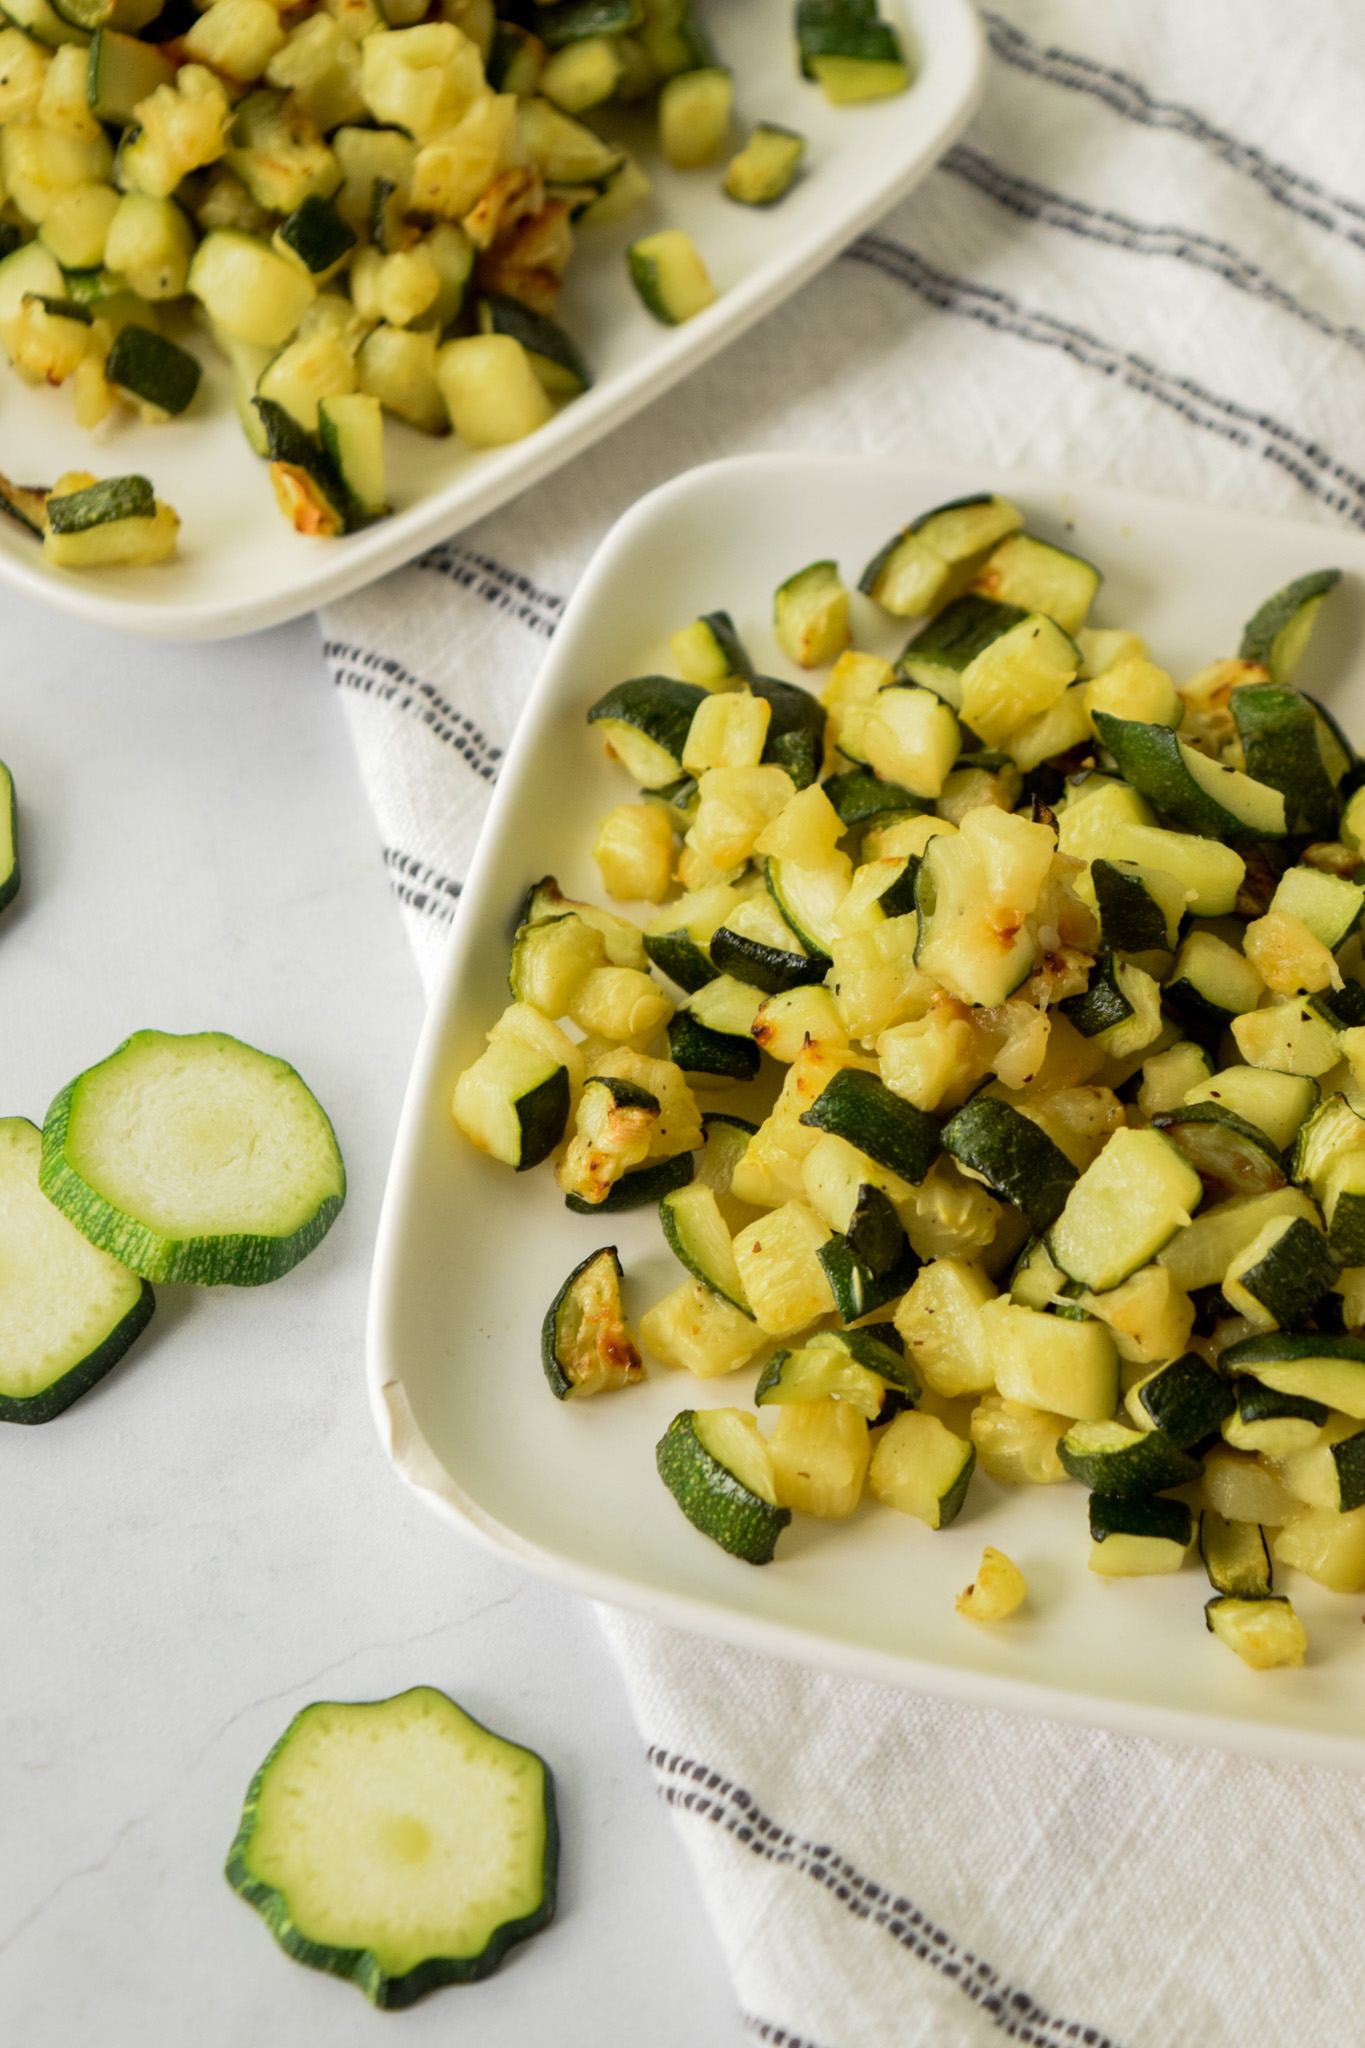 Diced zucchini cooked in an air fryer